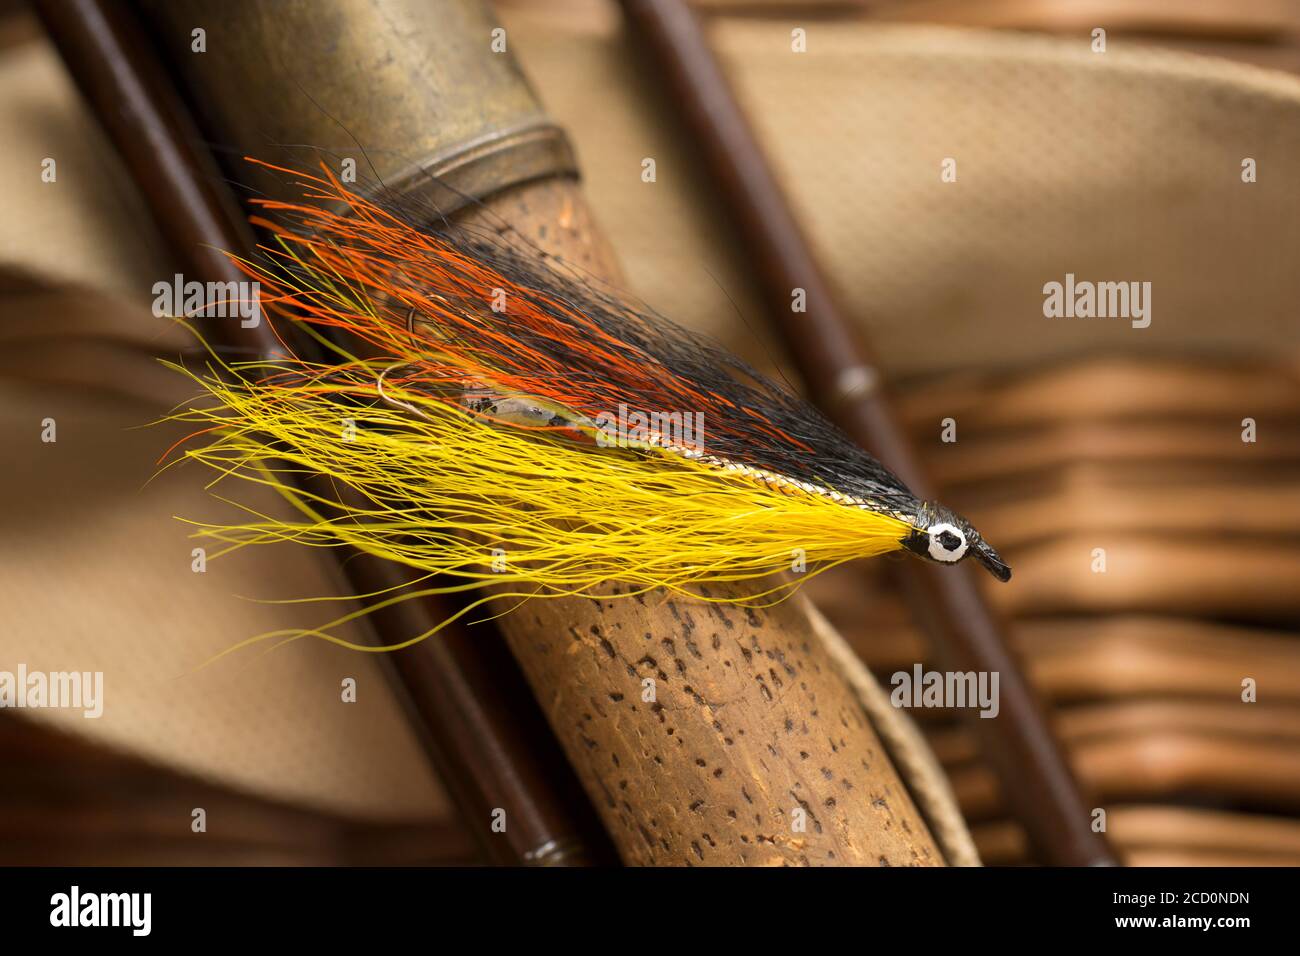 A single salmon fly that was probably homemade on the cork handle of an old  wooden salmon fly fishing rod. From a collection of vintage fishing tackle  Stock Photo - Alamy